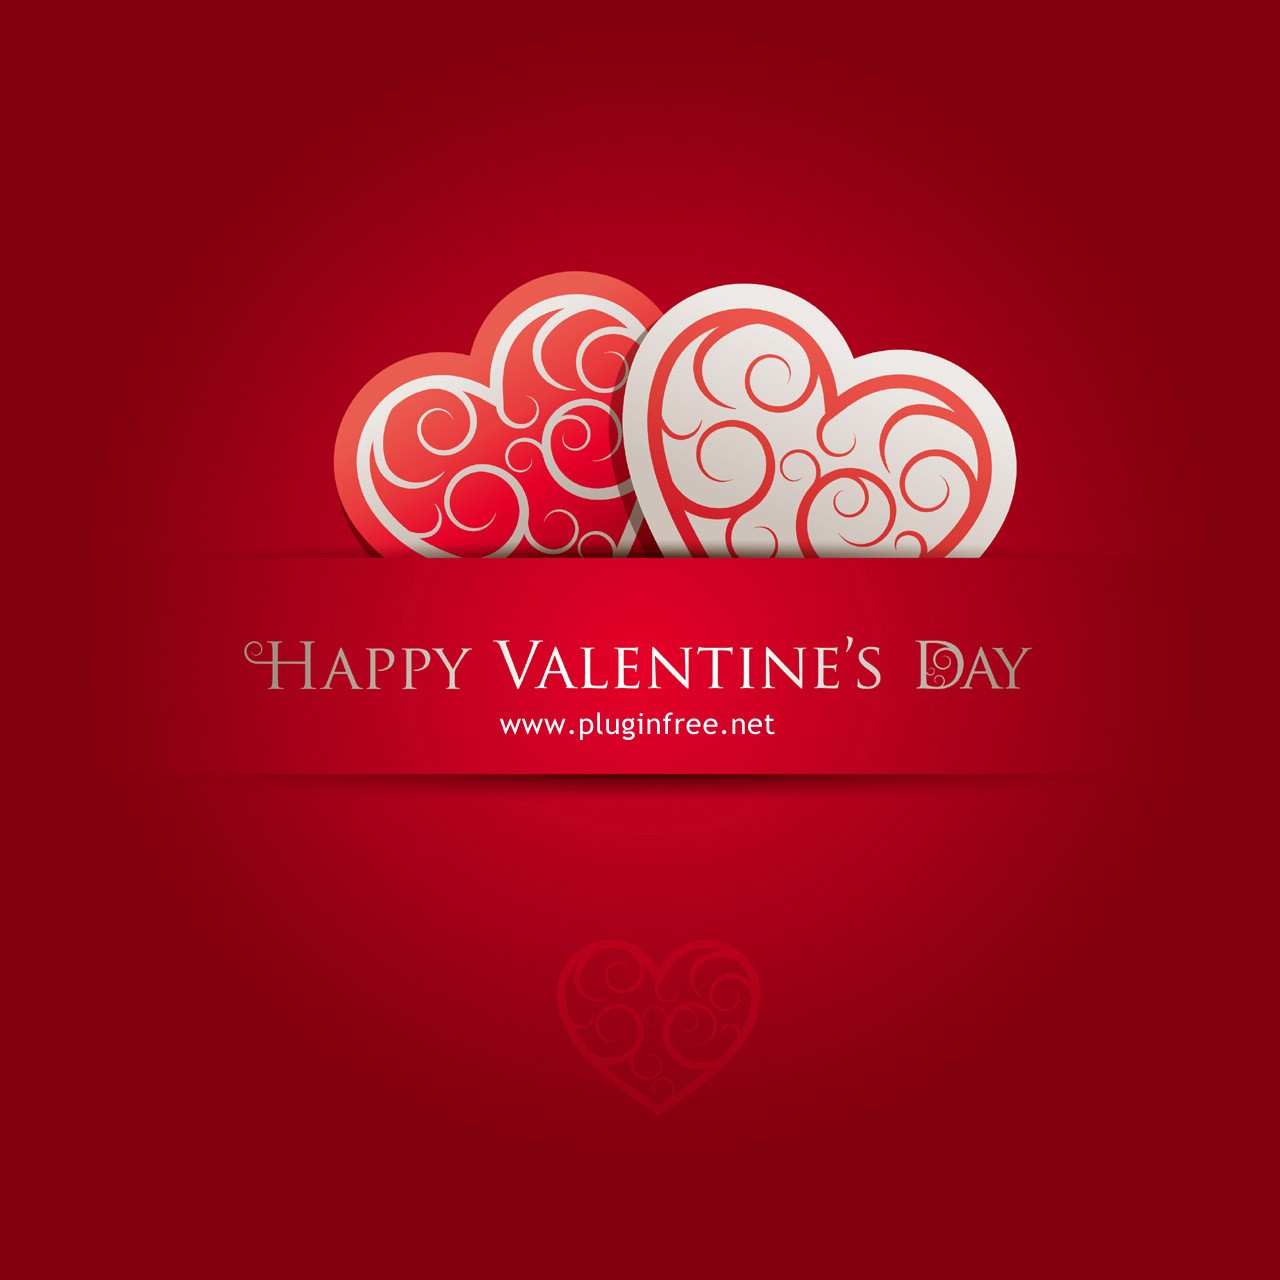 Happy Valentine's Day Greeting Card Picture